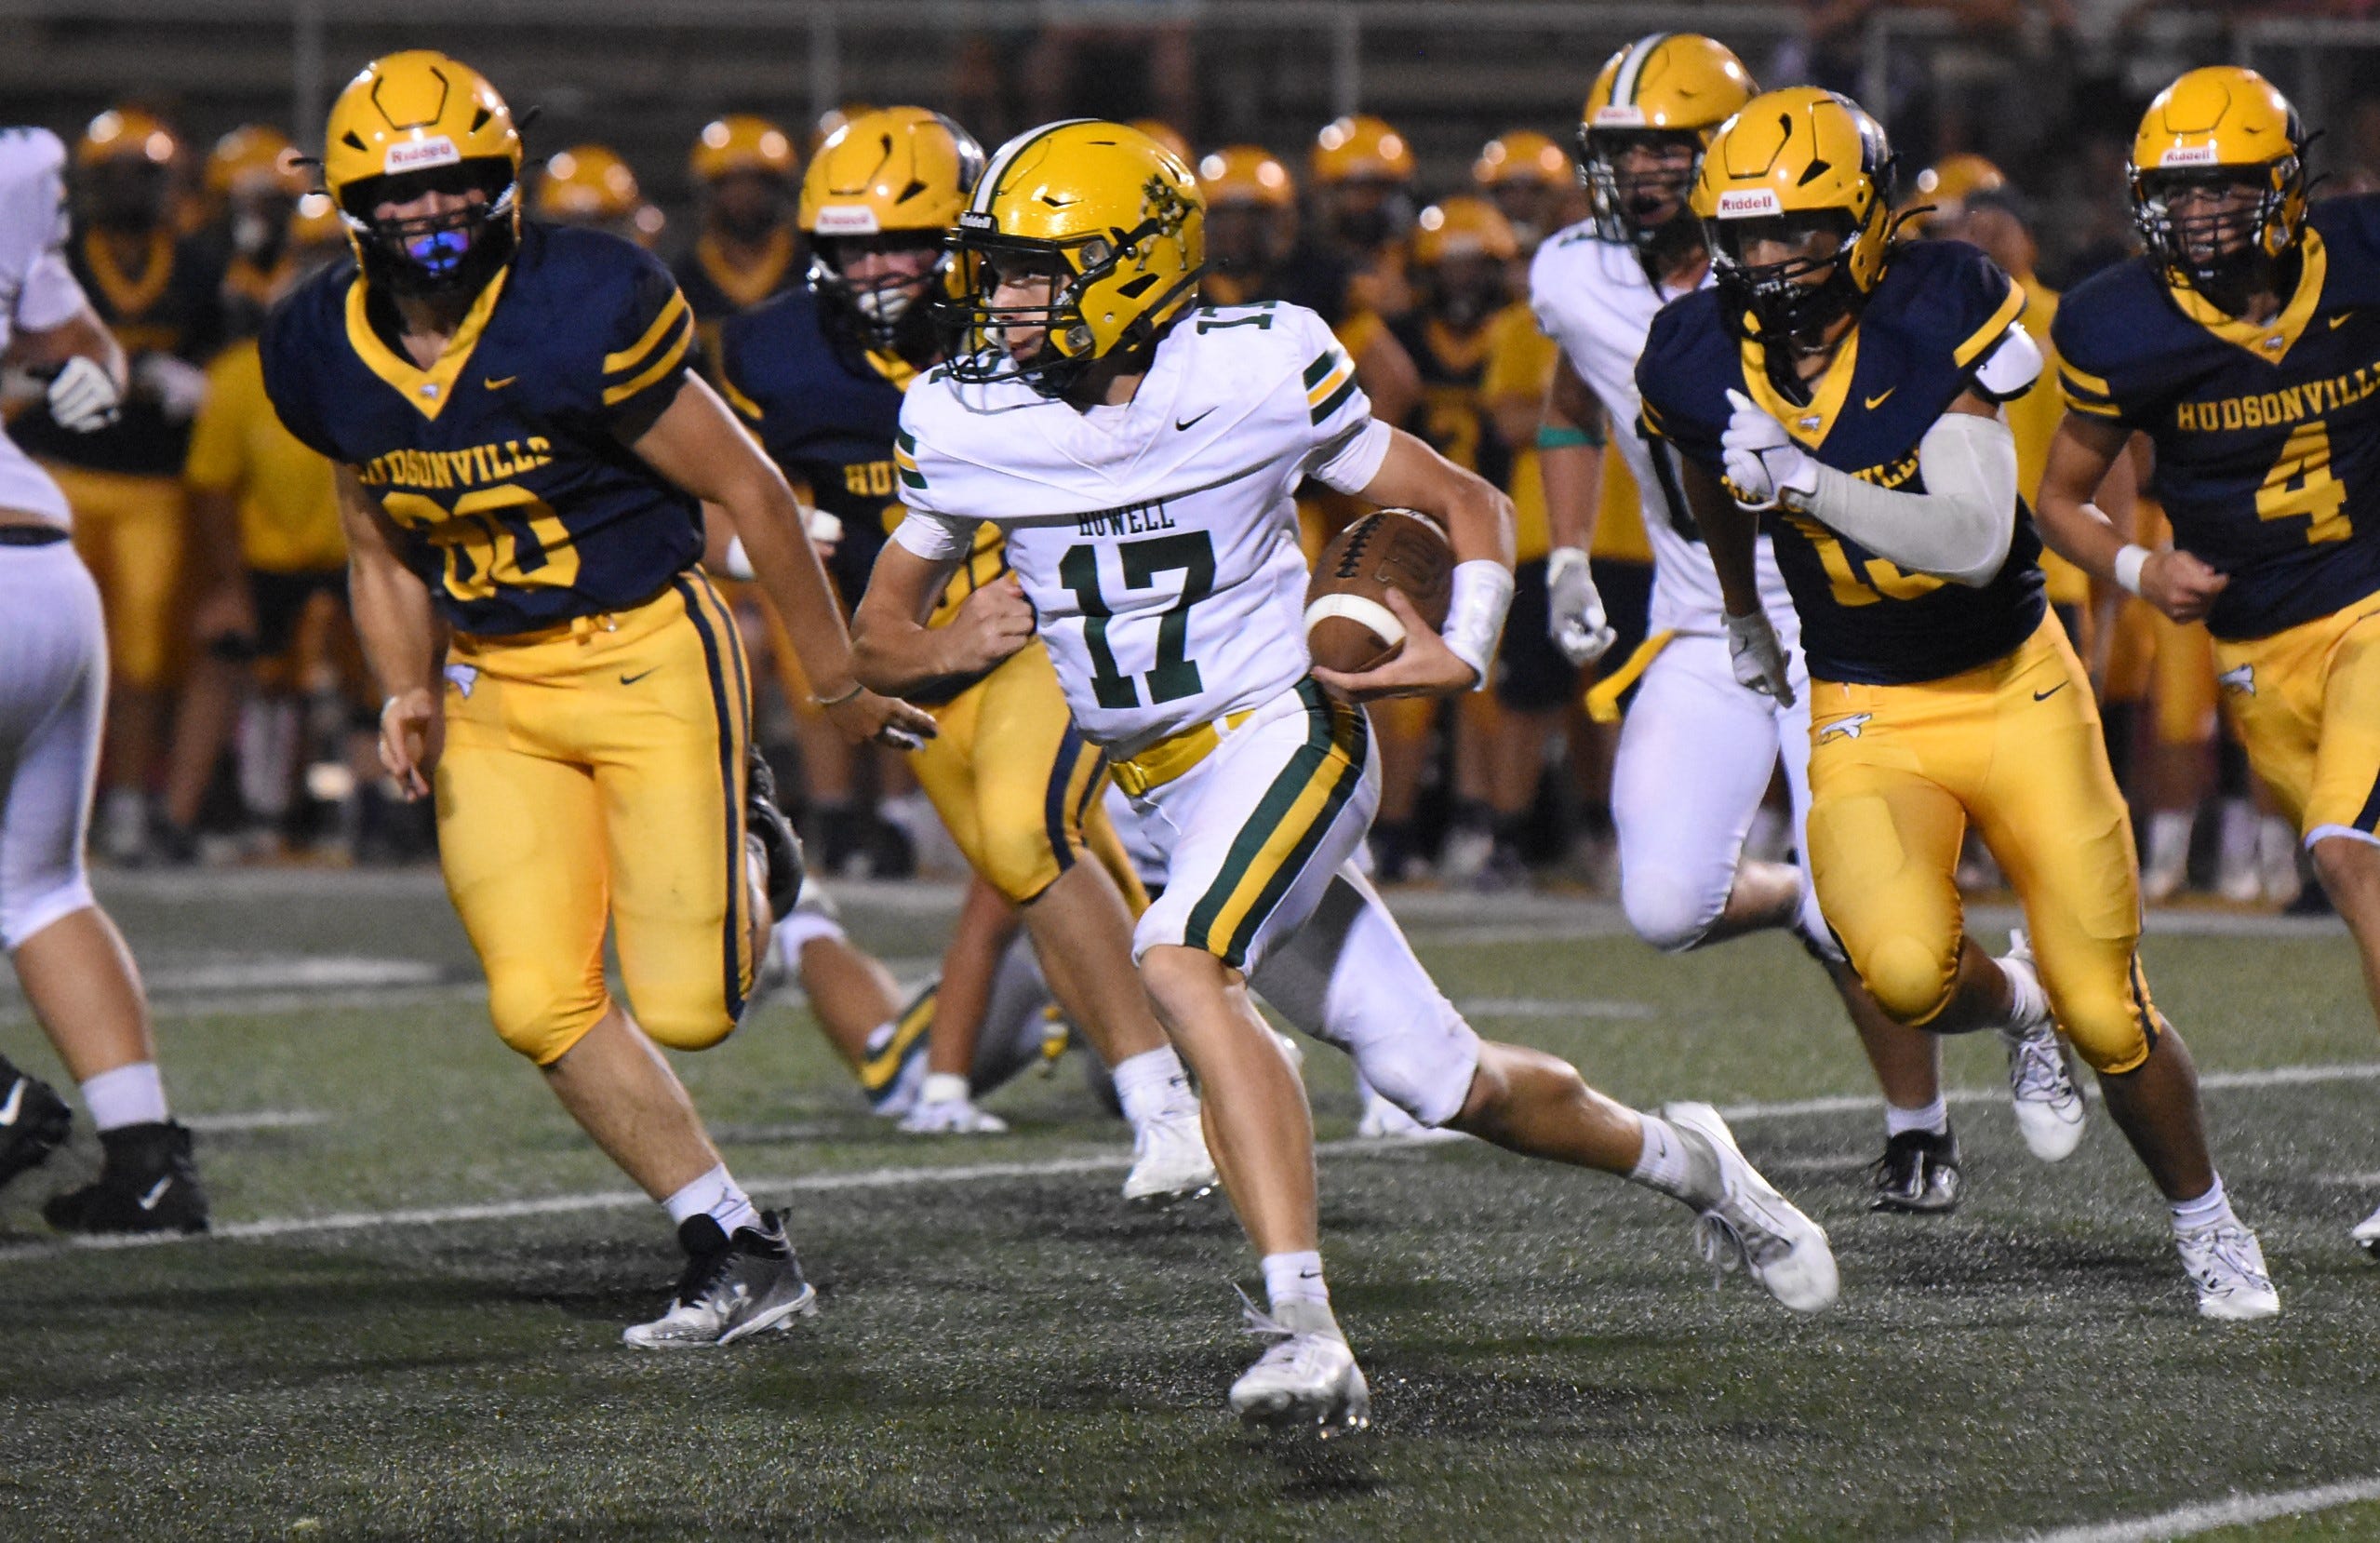 House call christens new Hartland football field in loss to East Kentwood